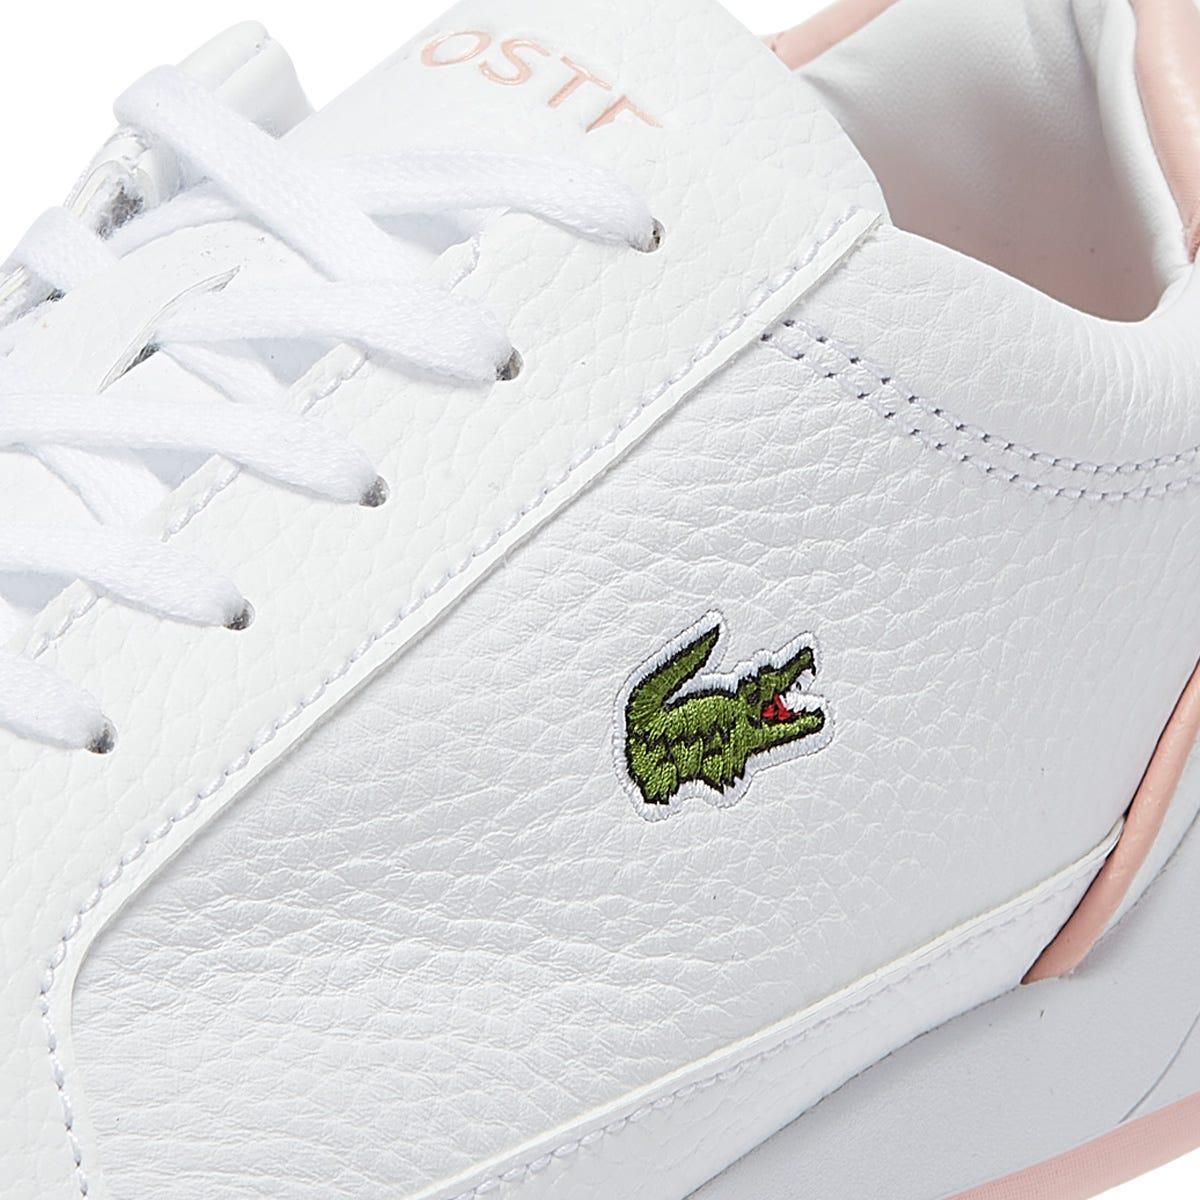 Lacoste Leather Challenge 721 1 / Light Pink Trainers in White - Lyst